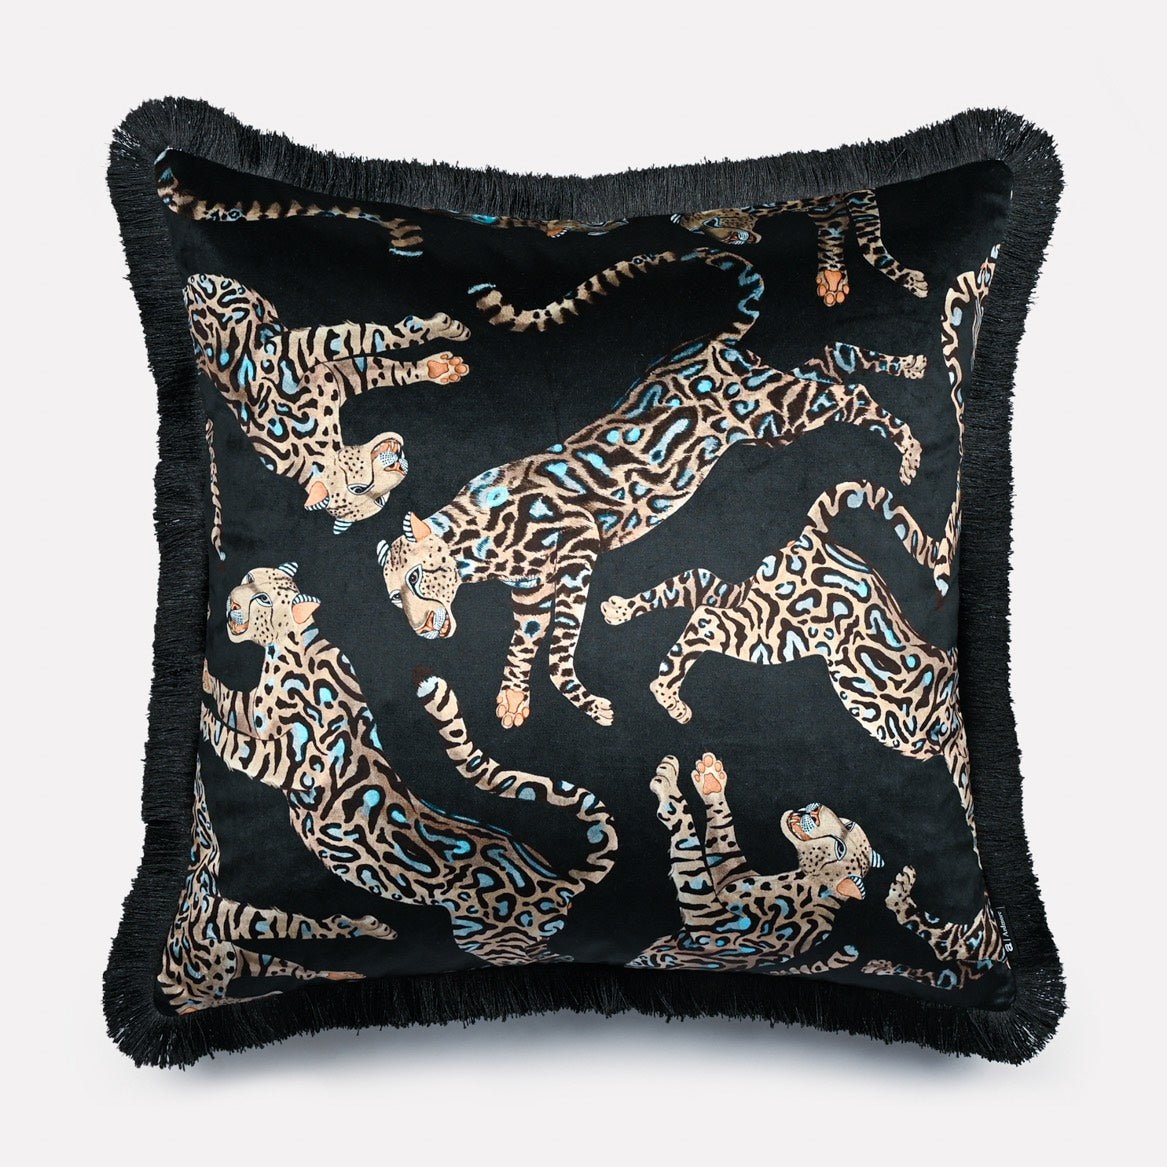 Cheetah Kings Starry Nights Cushion Cover with Fringe